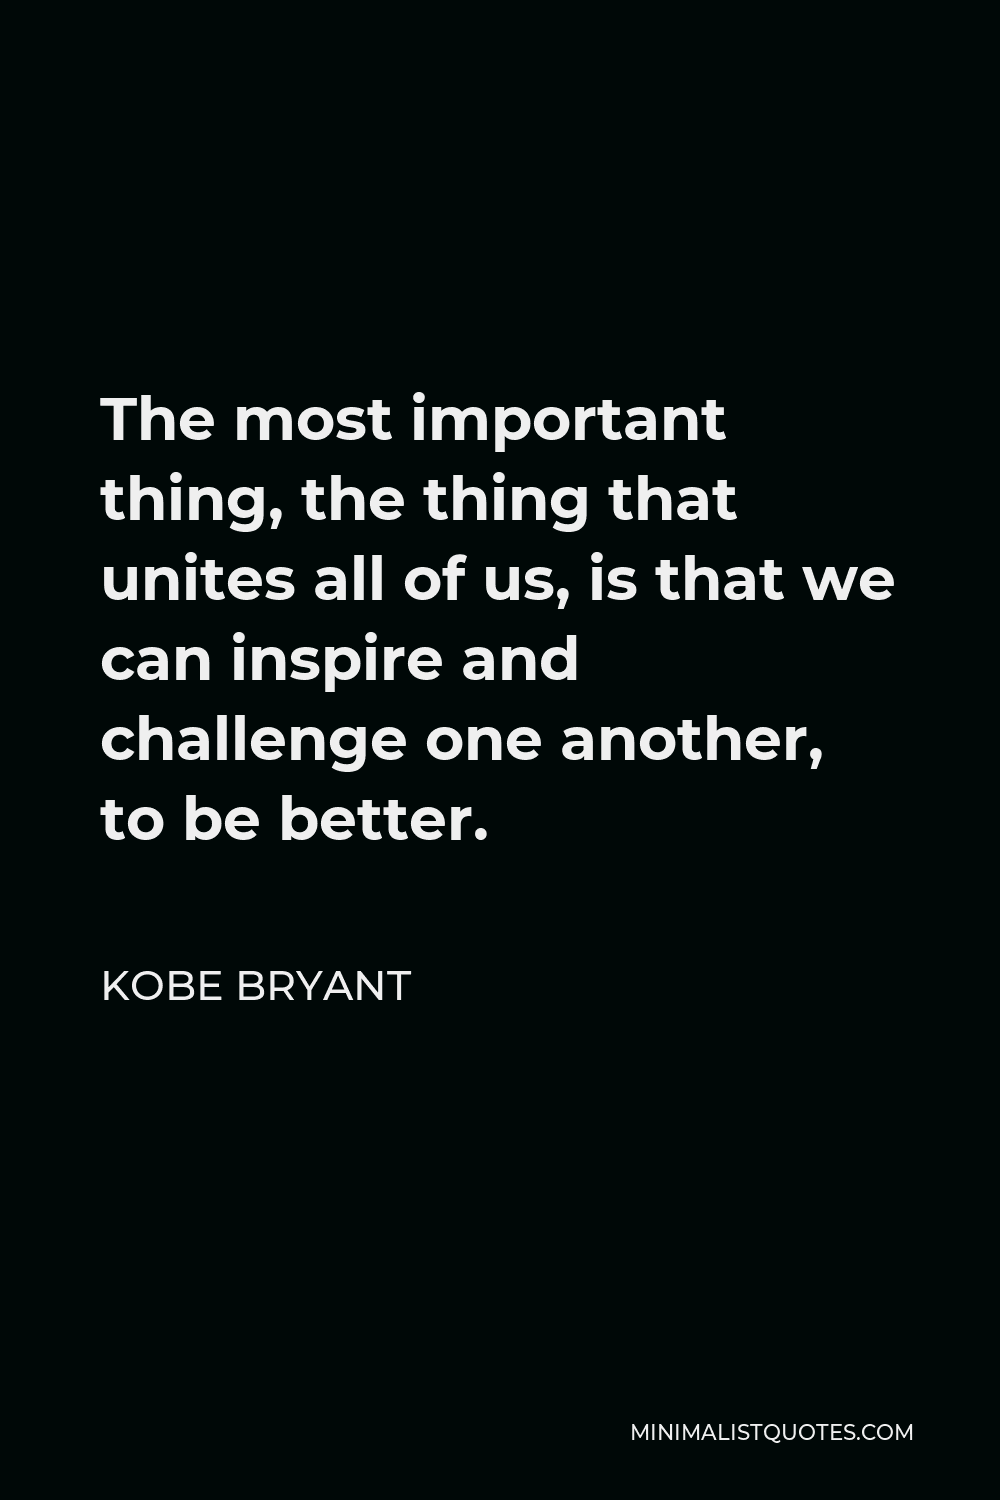 Kobe Bryant Quote - The most important thing, the thing that unites all of us, is that we can inspire and challenge one another, to be better.